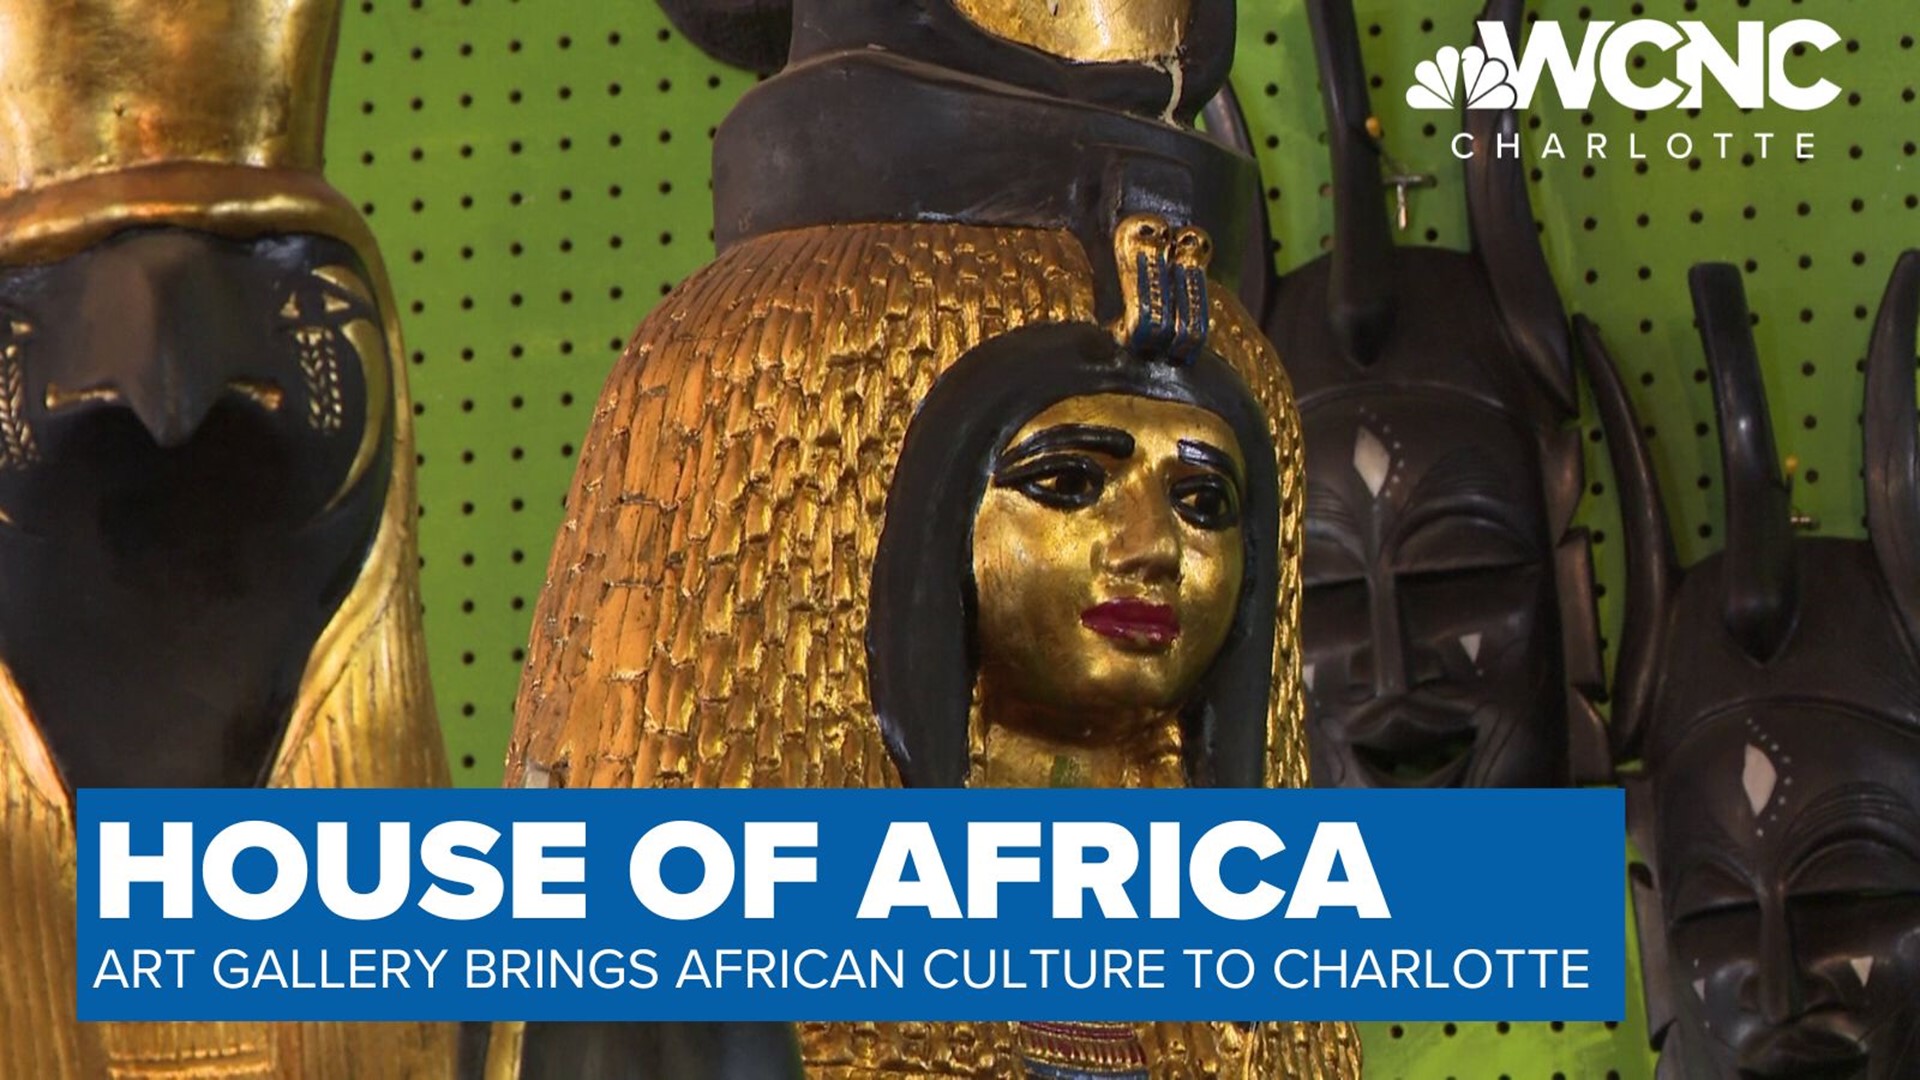 The House of Africa art gallery in Plaza Midwood has become the nerve center for education about African culture in Charlotte.